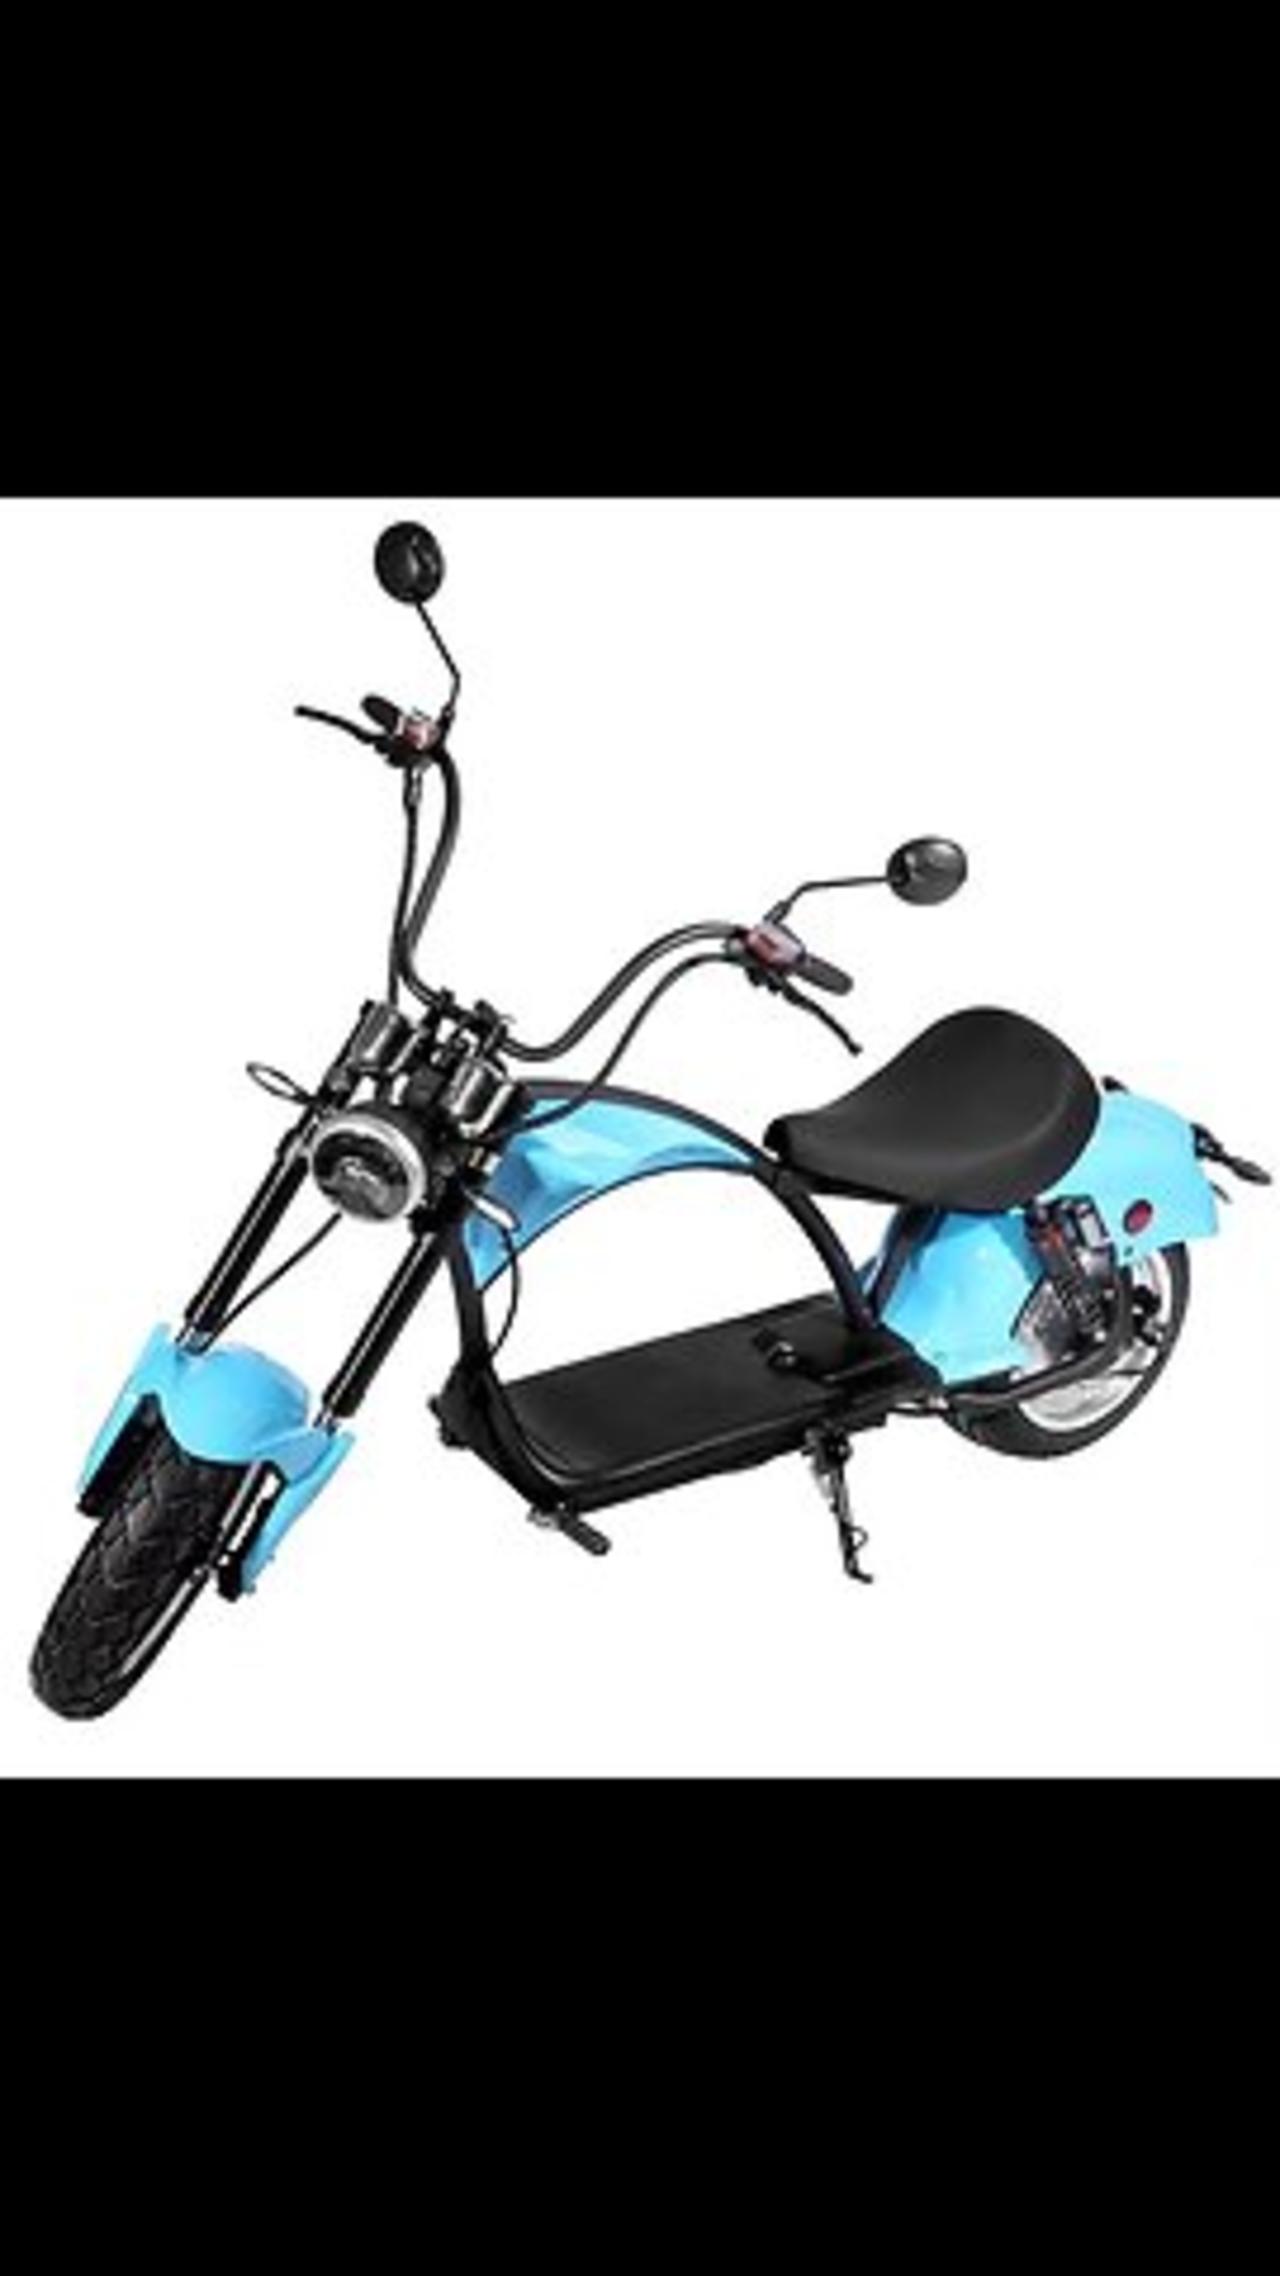 2000W Electric Motorbike Motorcycle CITYCOCO electric scooter in Holland warehouse stock